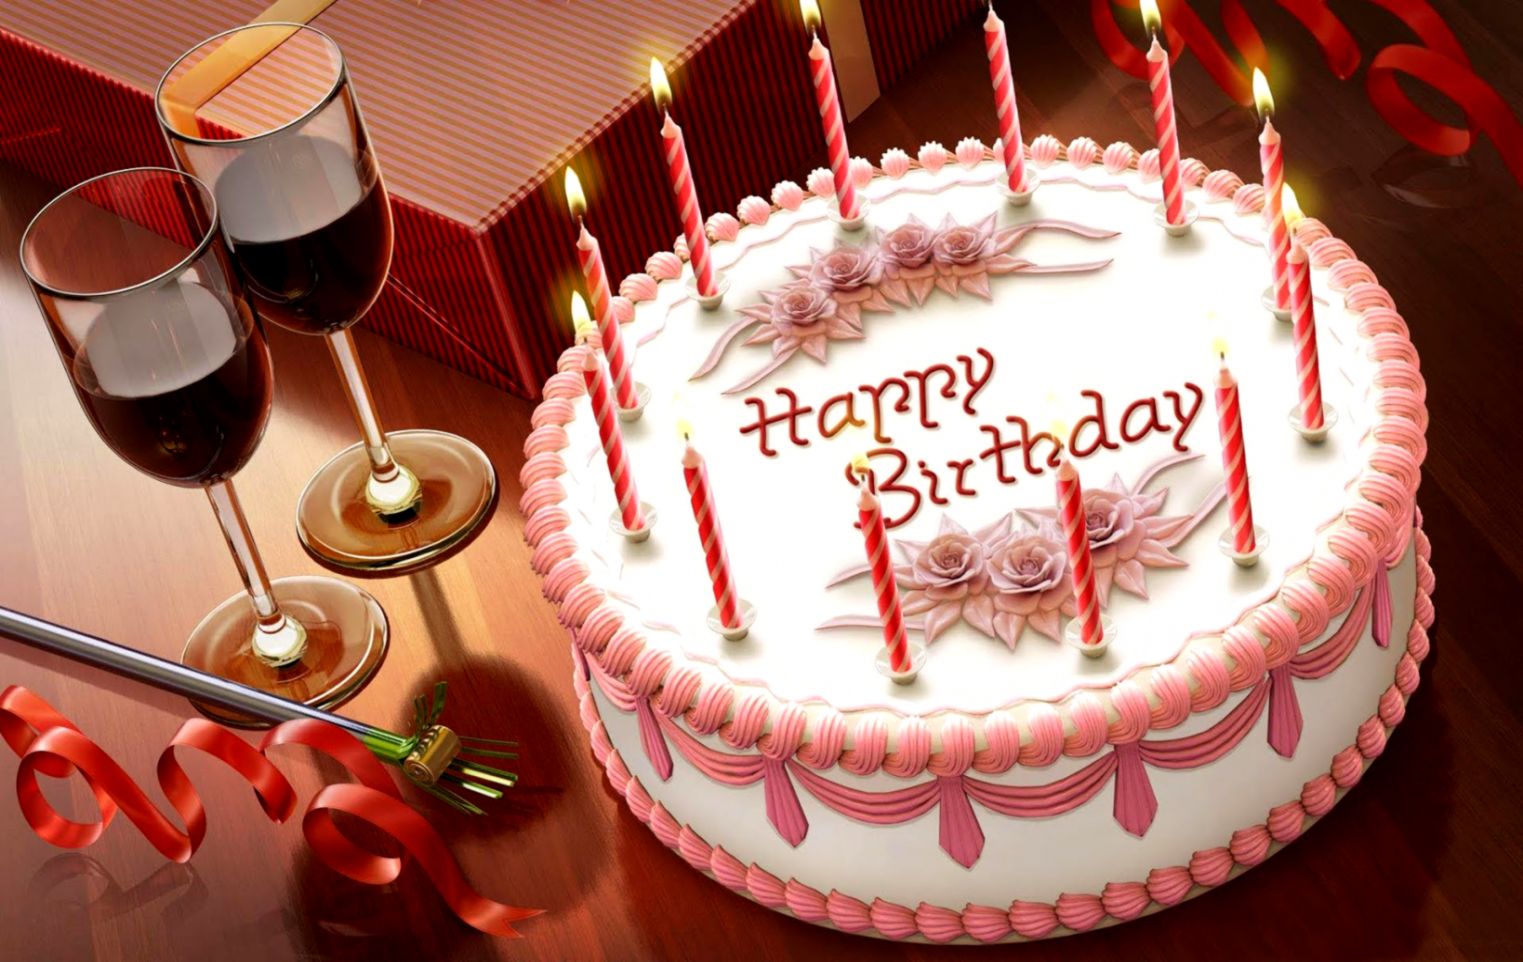 Free Download Happy Birthday Wallpapers - Birthday Wishes Pics Hd , HD Wallpaper & Backgrounds